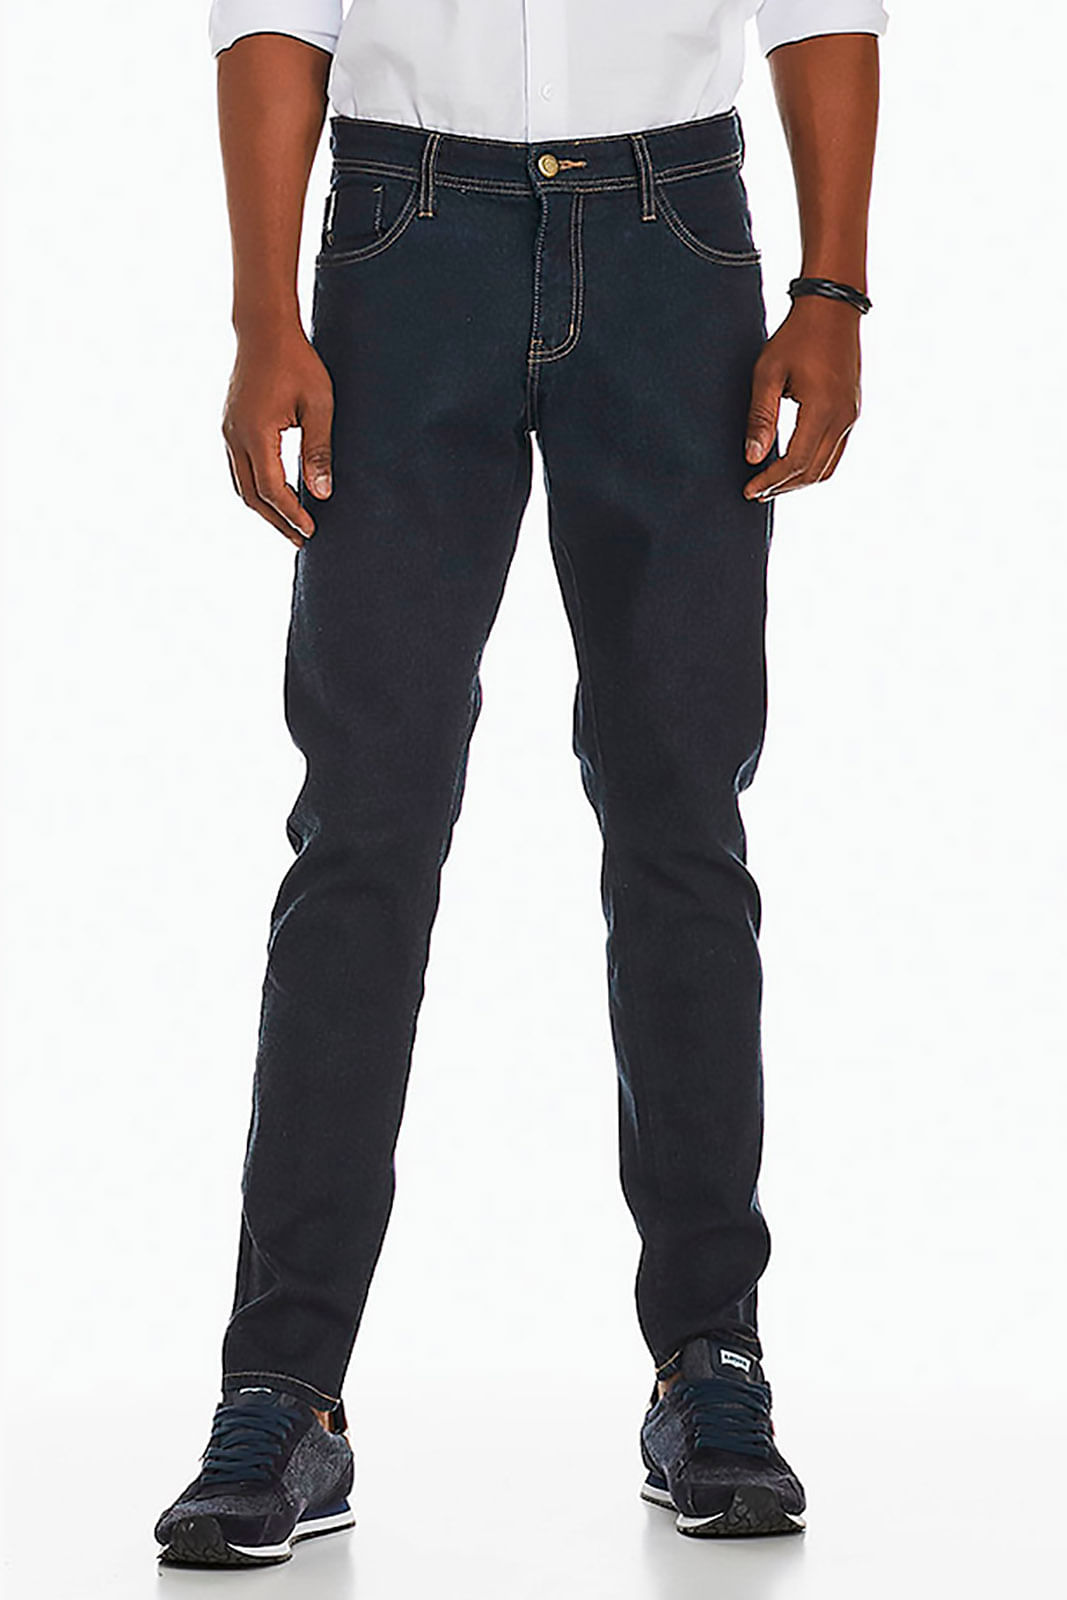 bulge collateral Ambiguous Denuncia Jeans - We Happy Shop